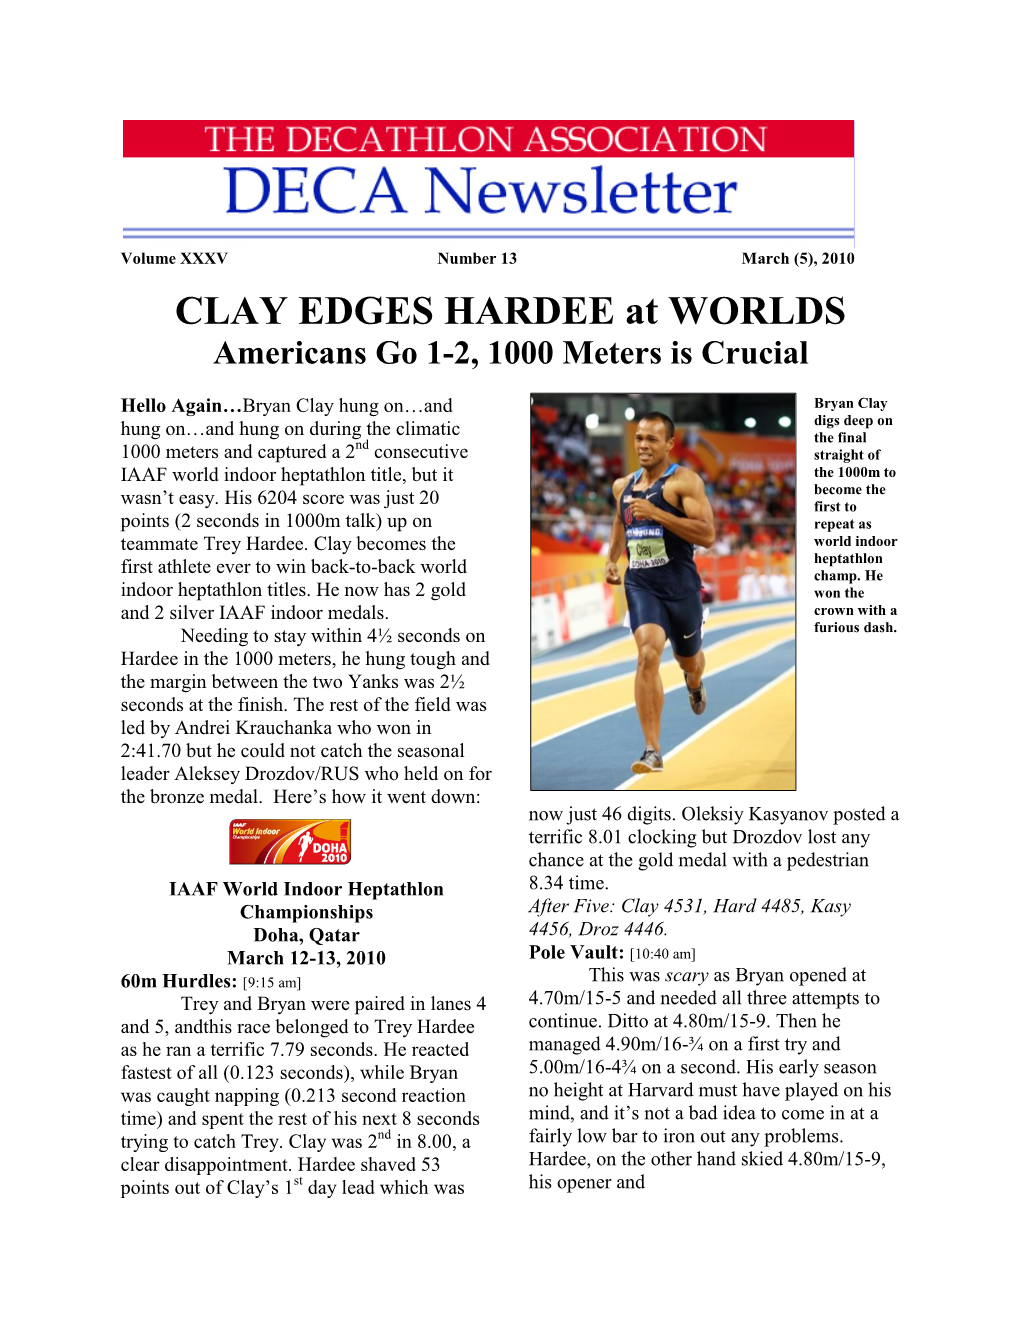 CLAY EDGES HARDEE at WORLDS Americans Go 1-2, 1000 Meters Is Crucial